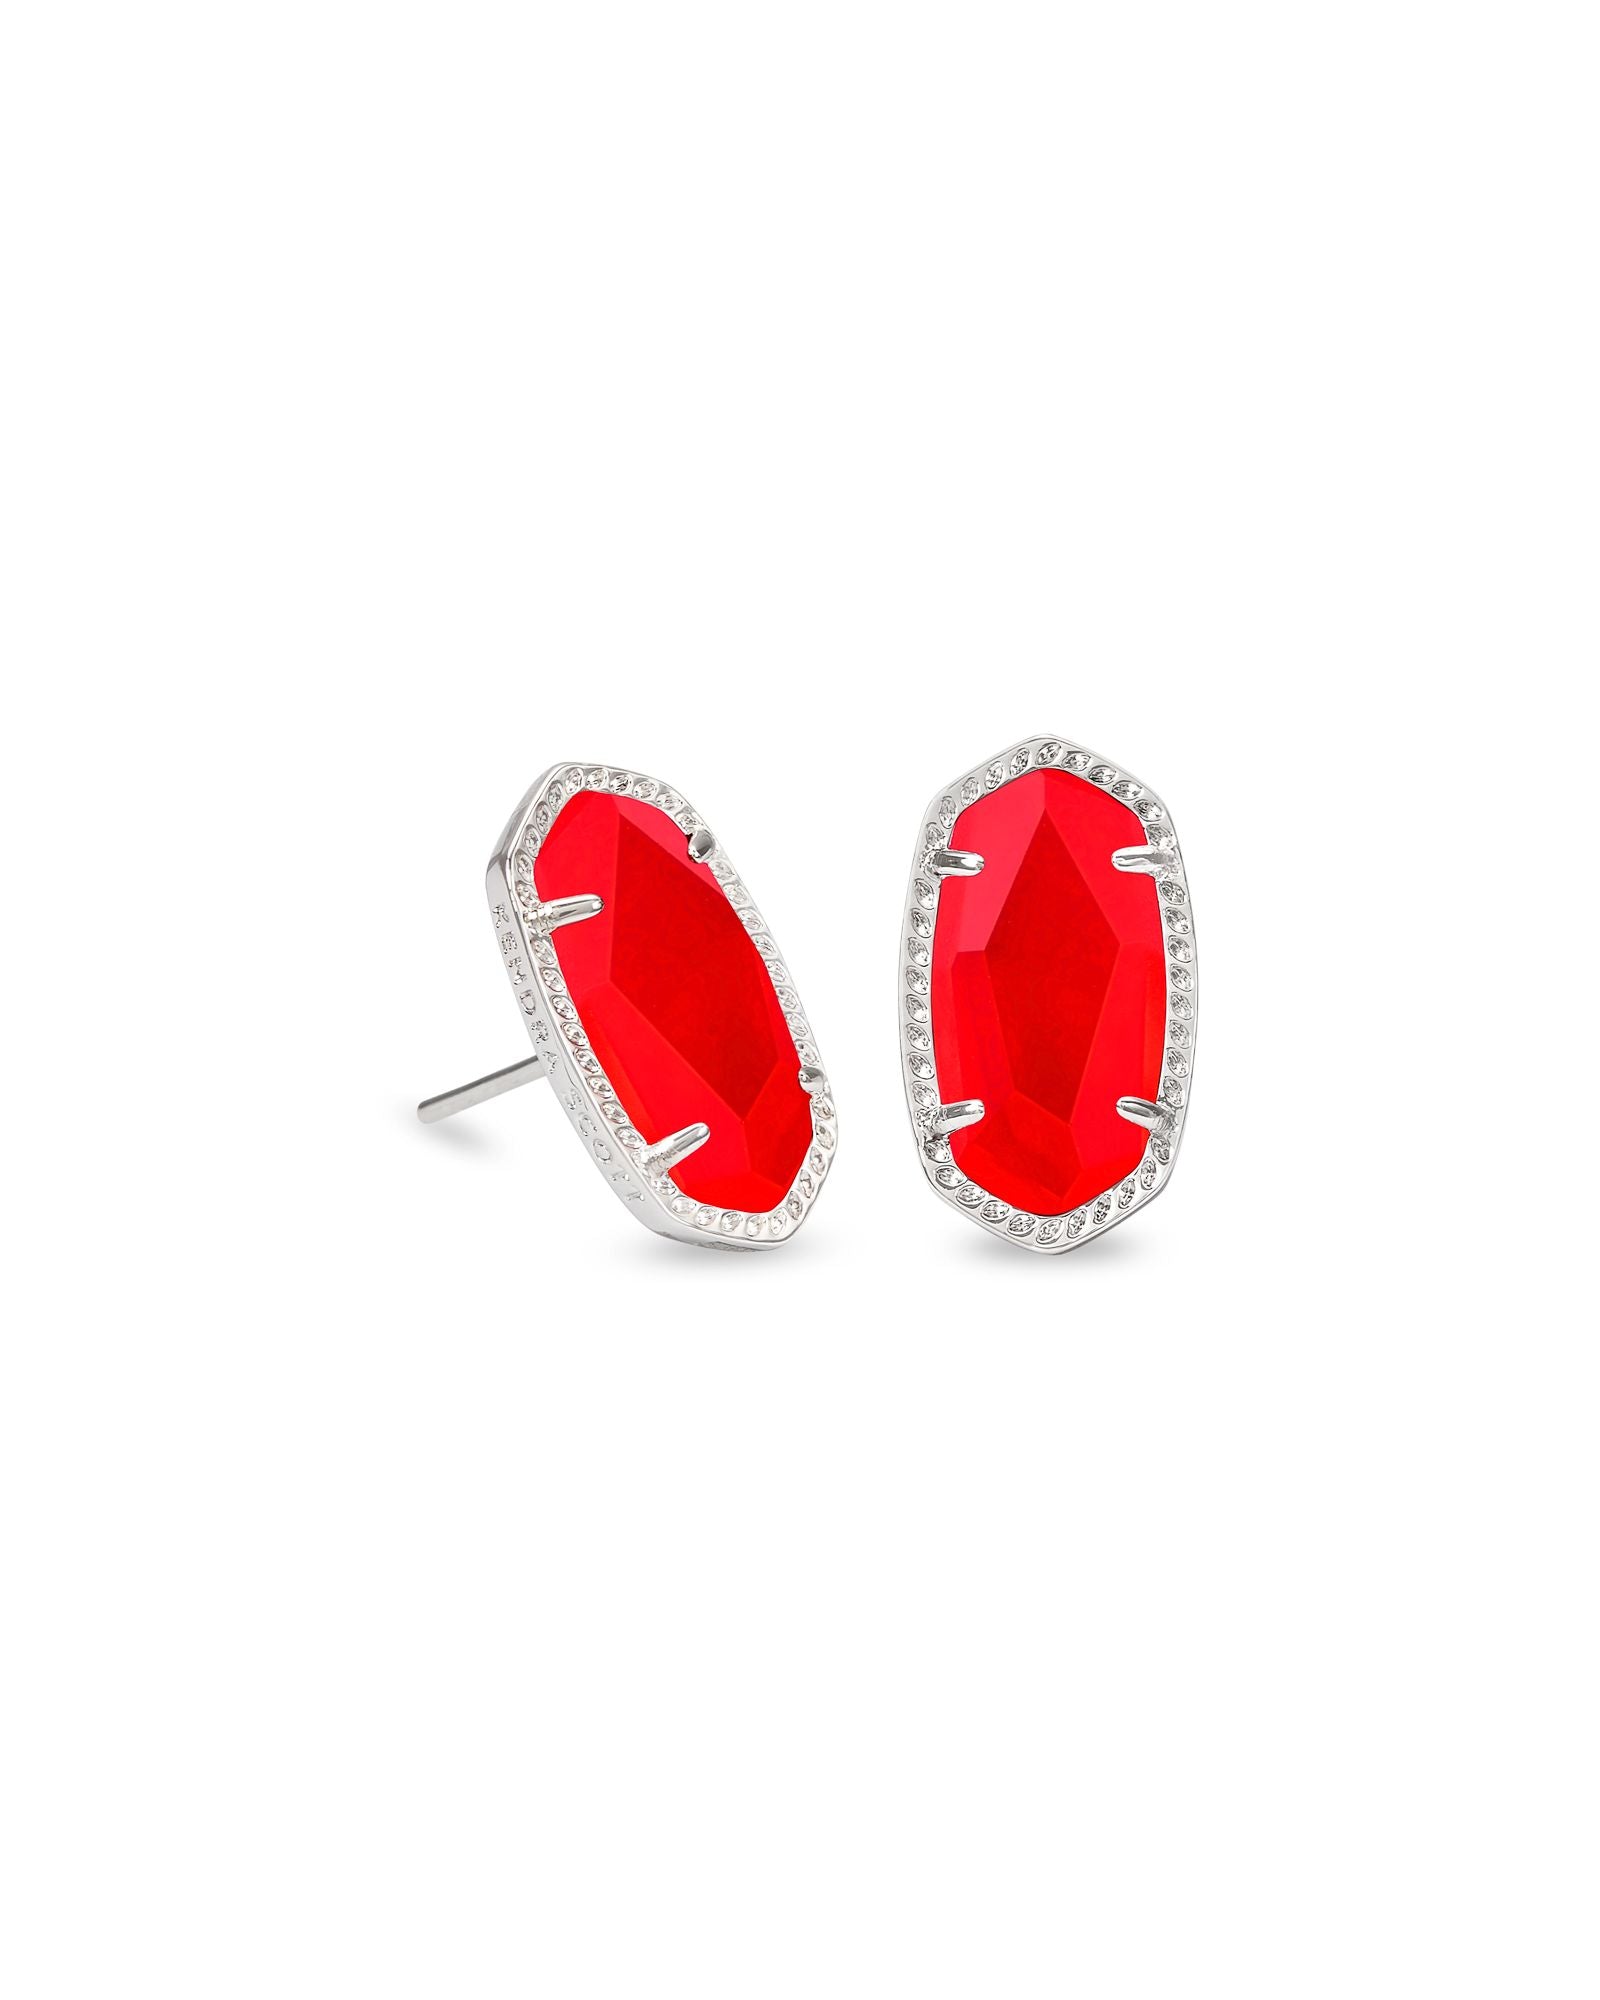 Ellie Stud Earrings Red Illusion Gold or Silver